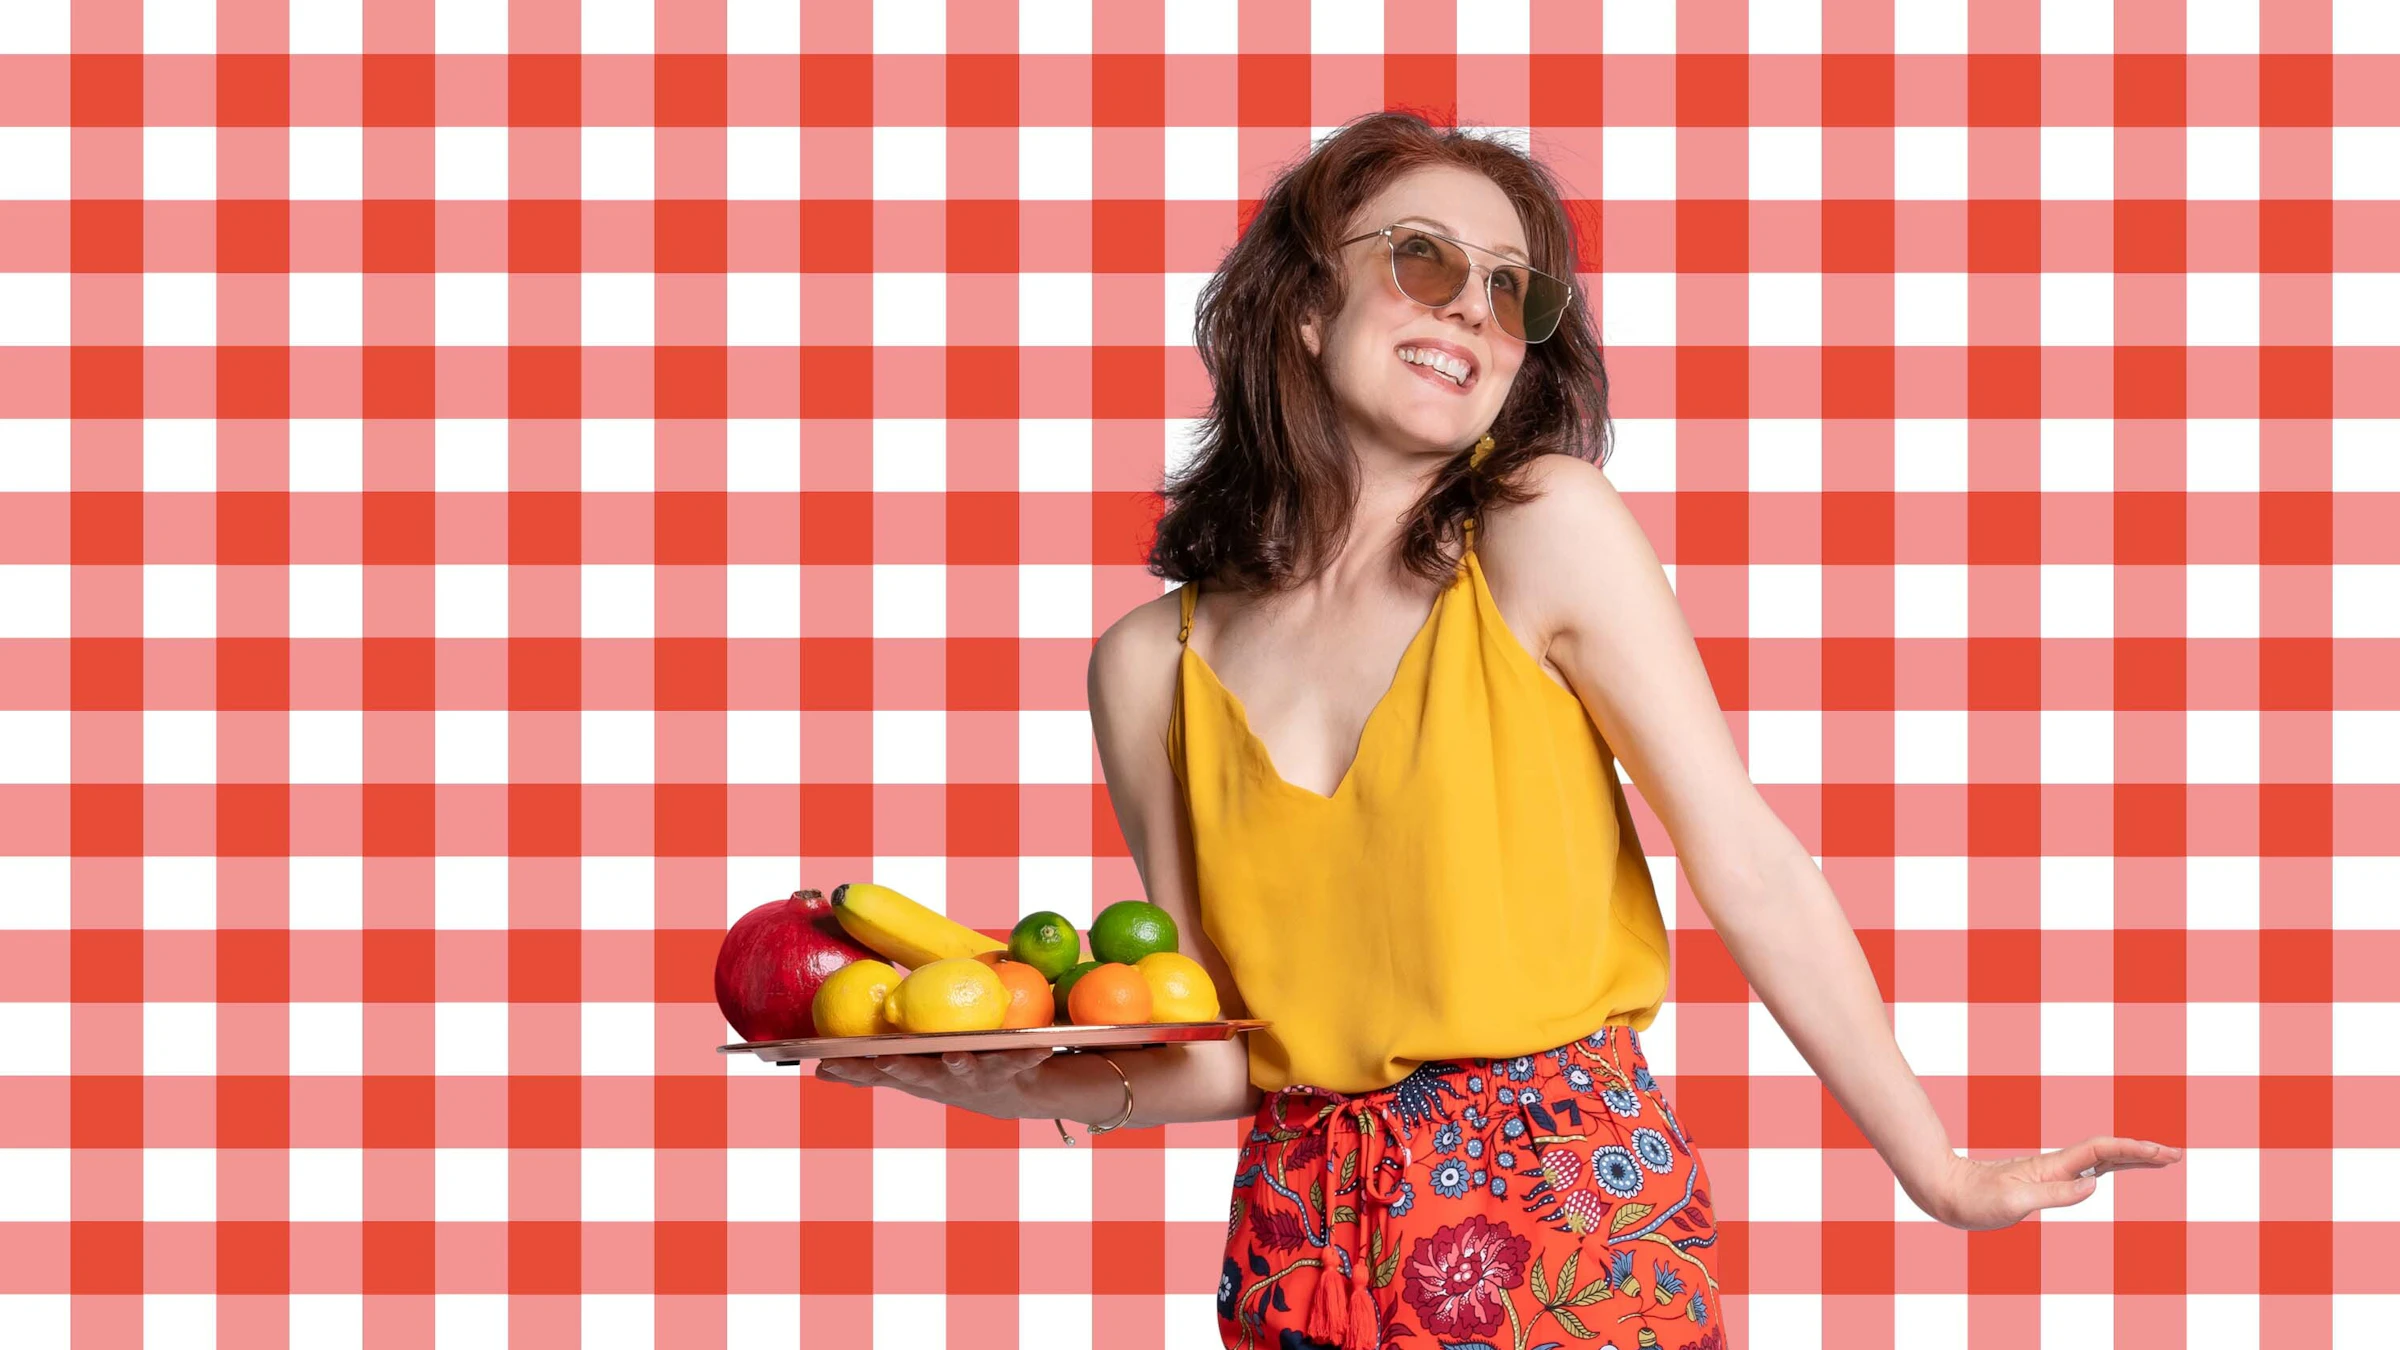 Woman in yellow top floral skirt holding platter of fruit against red checkered background communal living recipes